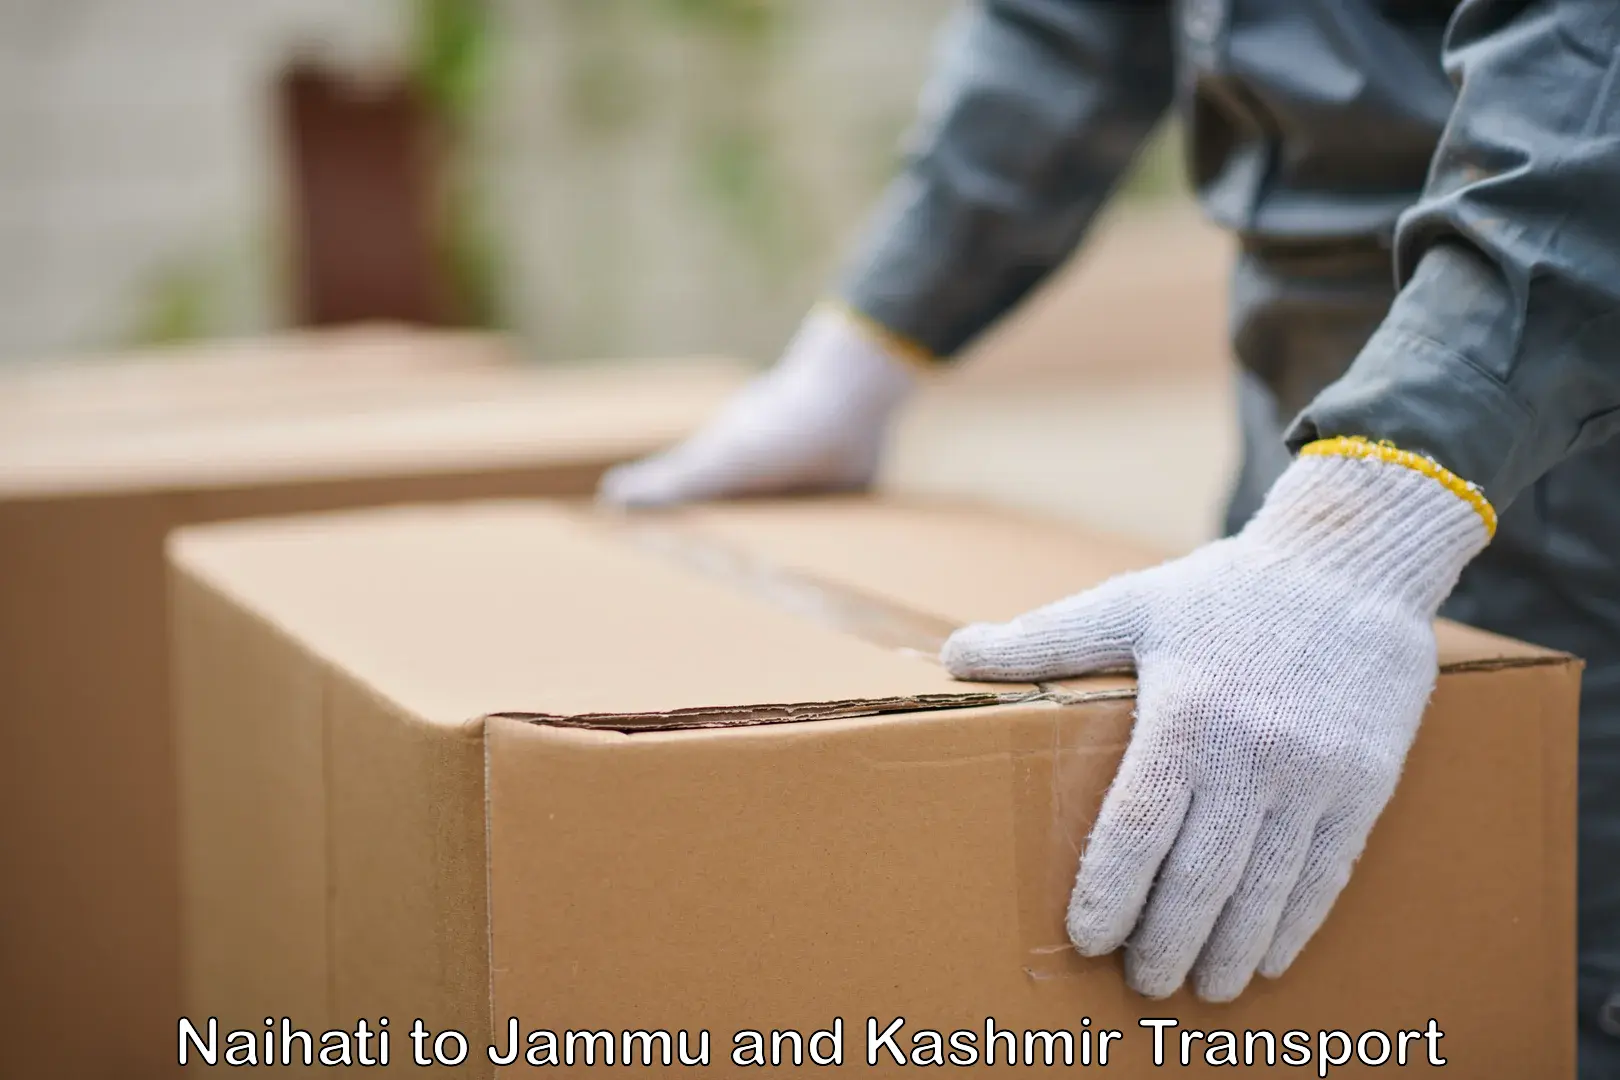 Container transport service Naihati to Shopian